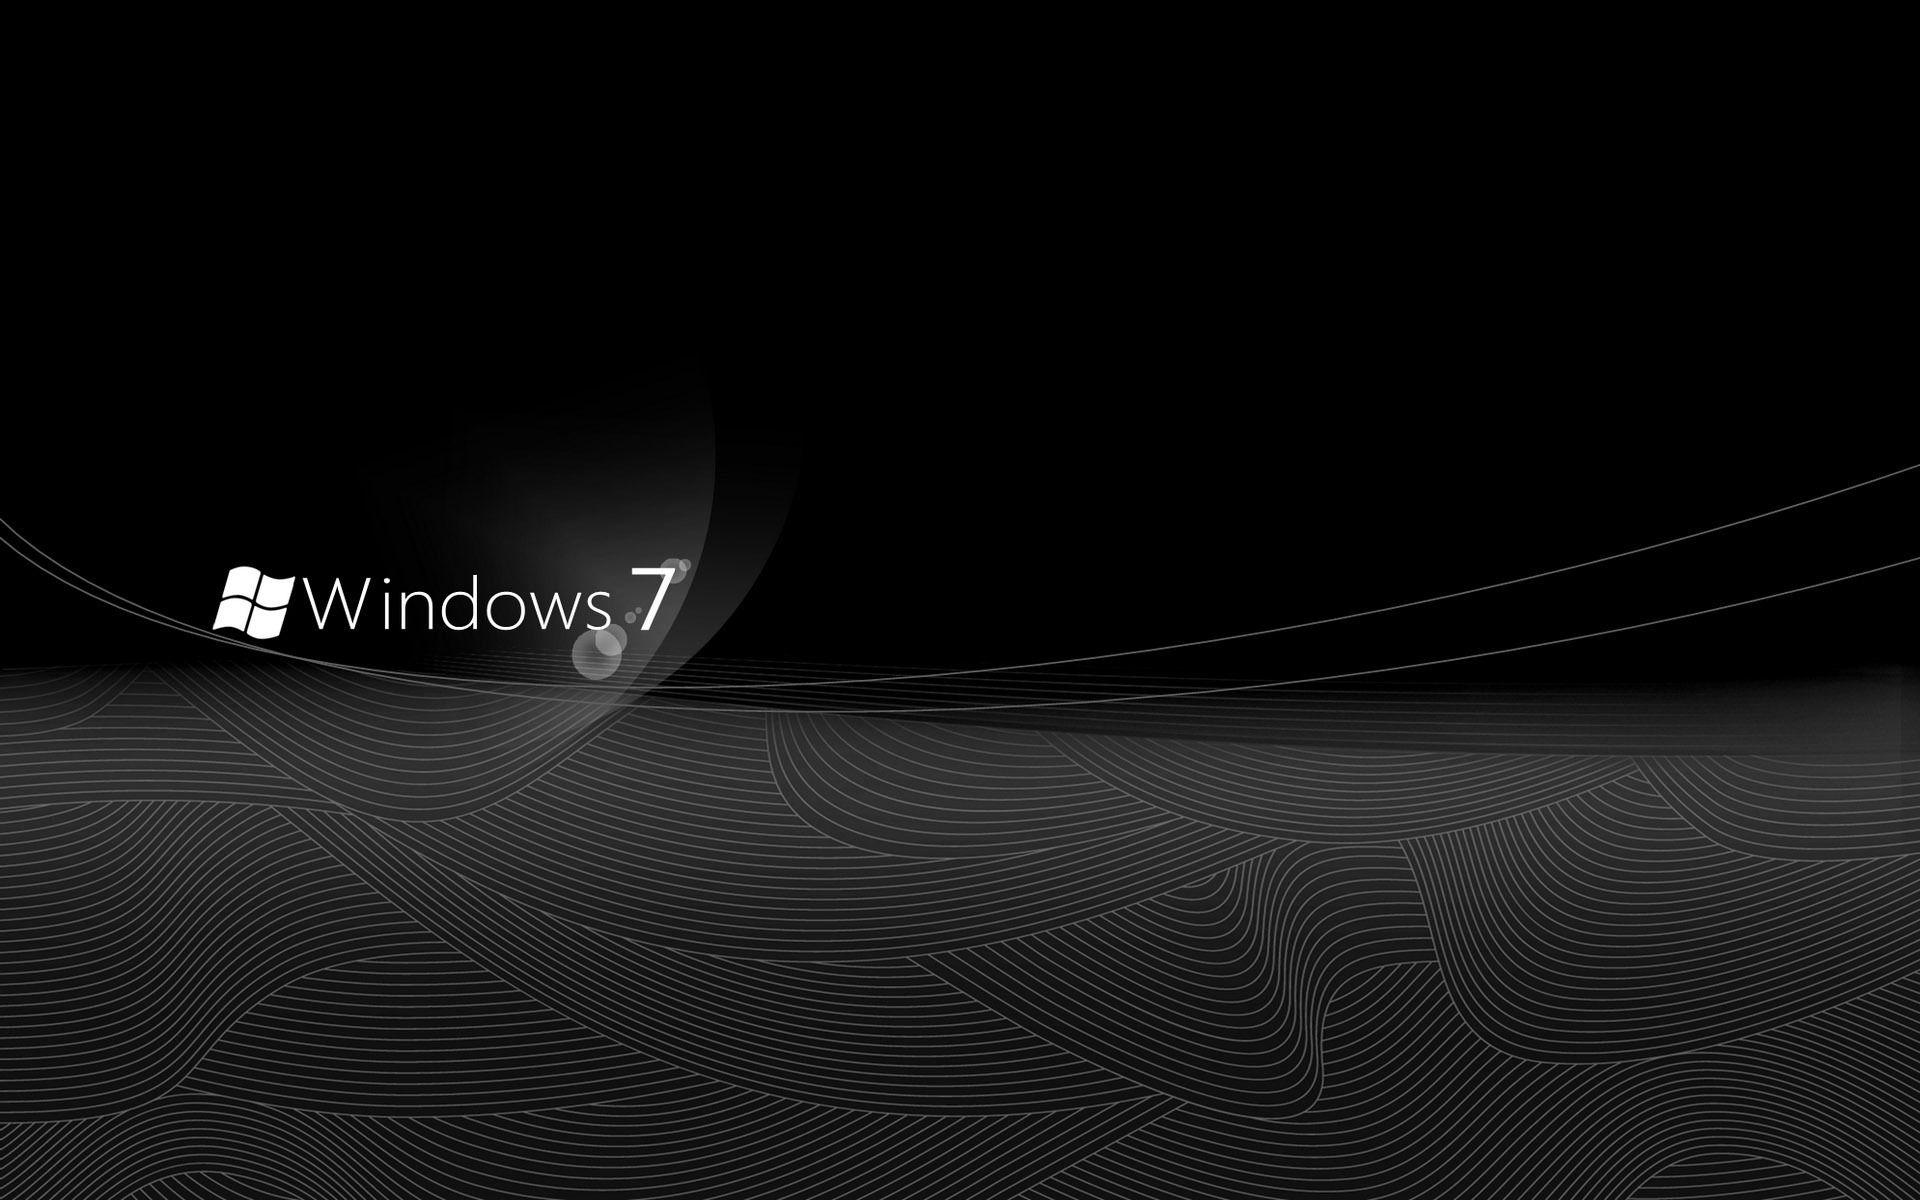 the colour Black image Windows HD wallpaper and background photo